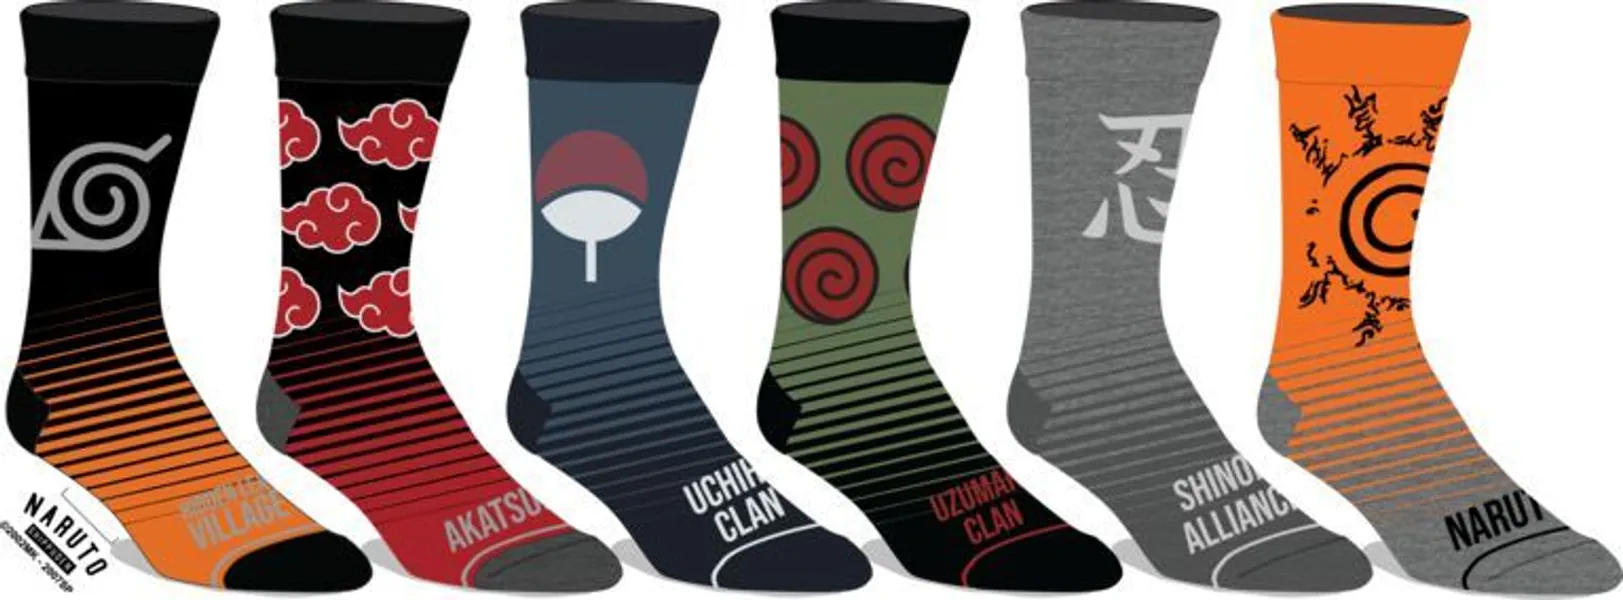 Naruto Shippuden Collection Icons 6-Pair Casual Crew Socks